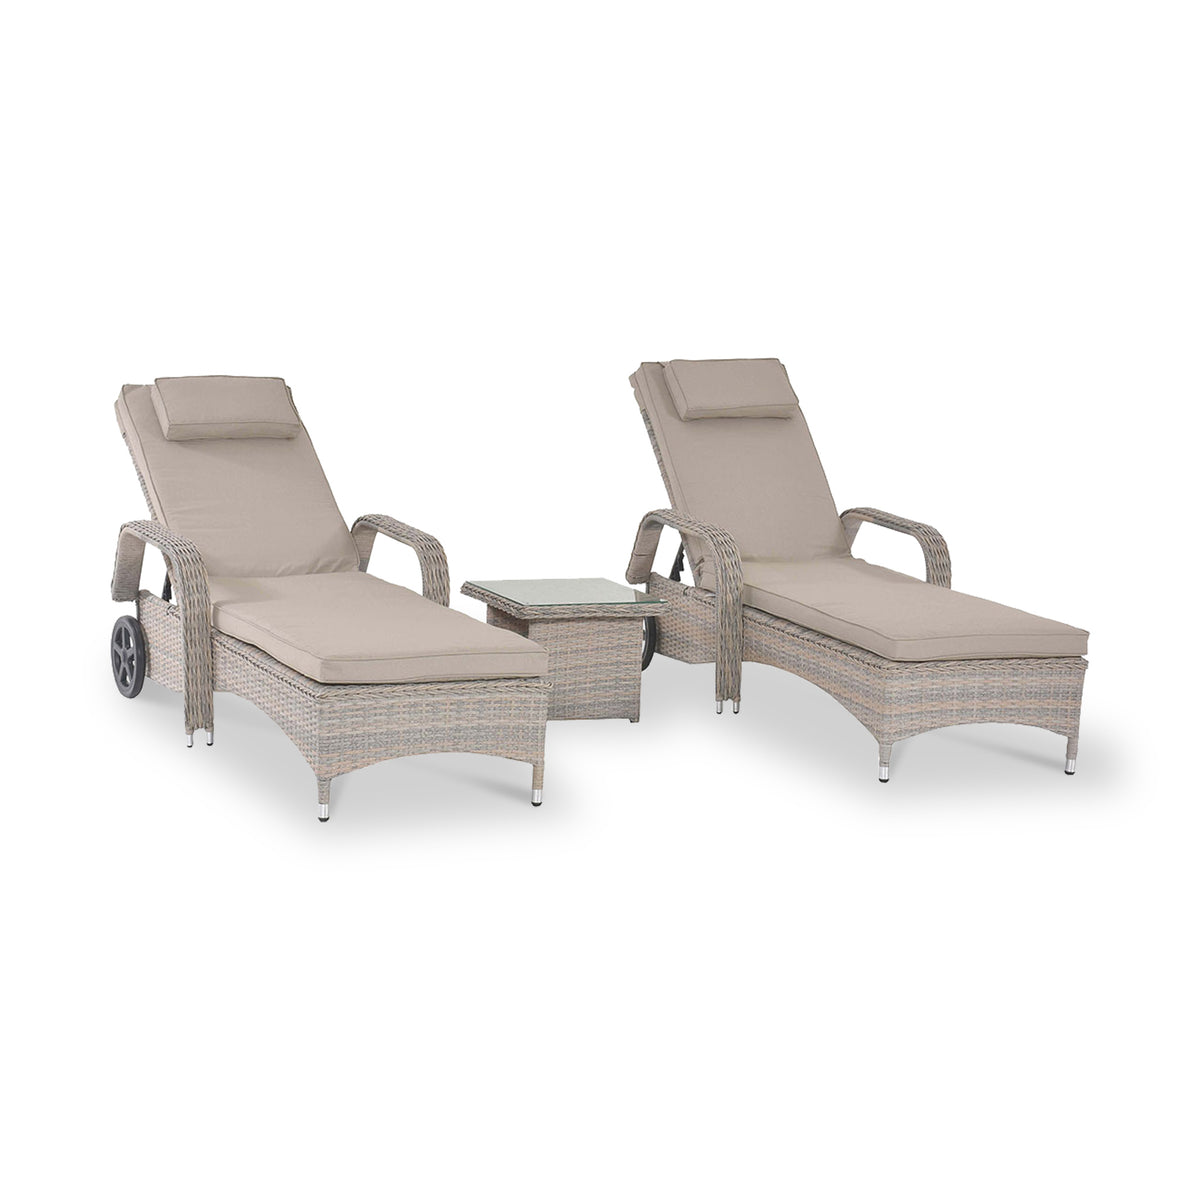 Maze Cotswold Rattan Sunlounger Set with Side Table from Roseland Furniture